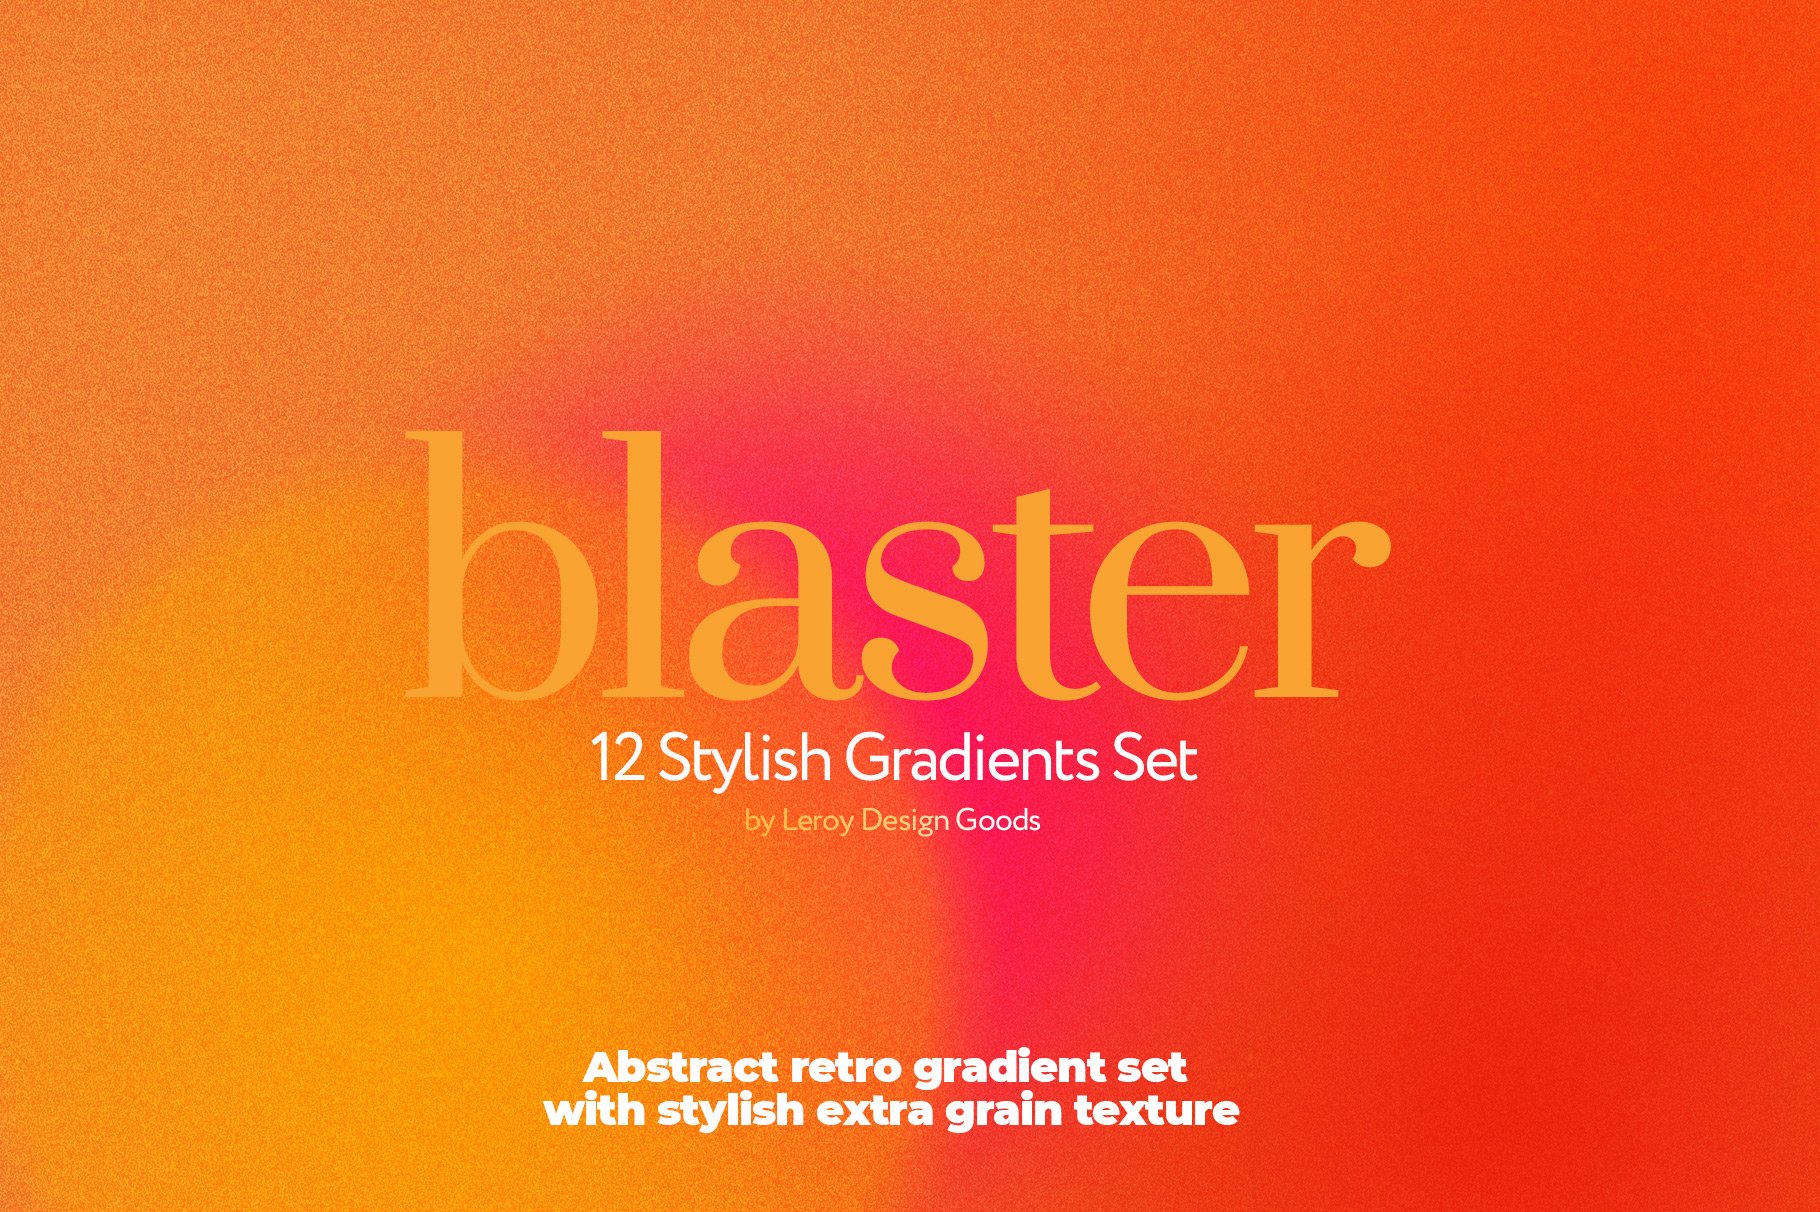 Collection includes 12 stylish gradients set.